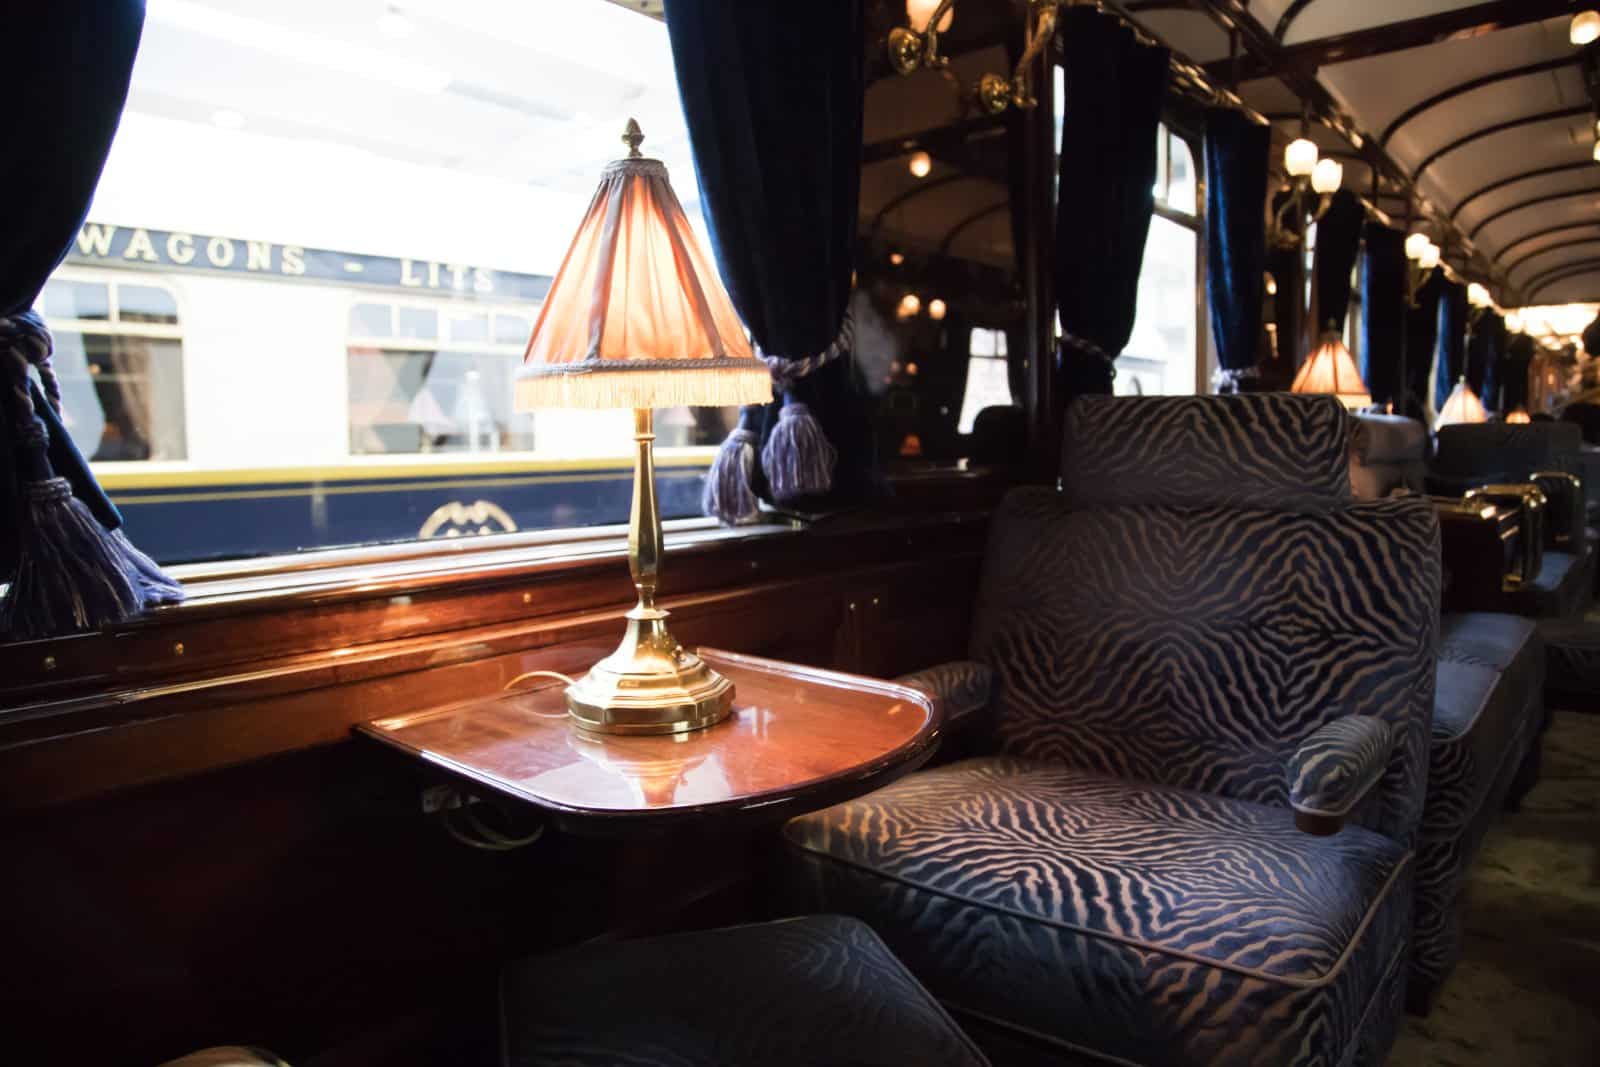 <p class="wp-caption-text">Image Credit: Shutterstock / Filippo.P</p>  <p><span>Traveling on the Venice Simplon-Orient-Express is akin to stepping back to a bygone era of glamour and sophistication. The train’s carriages, restored to their original 1920s and 1930s grandeur, offer an unparalleled travel experience. </span></p>